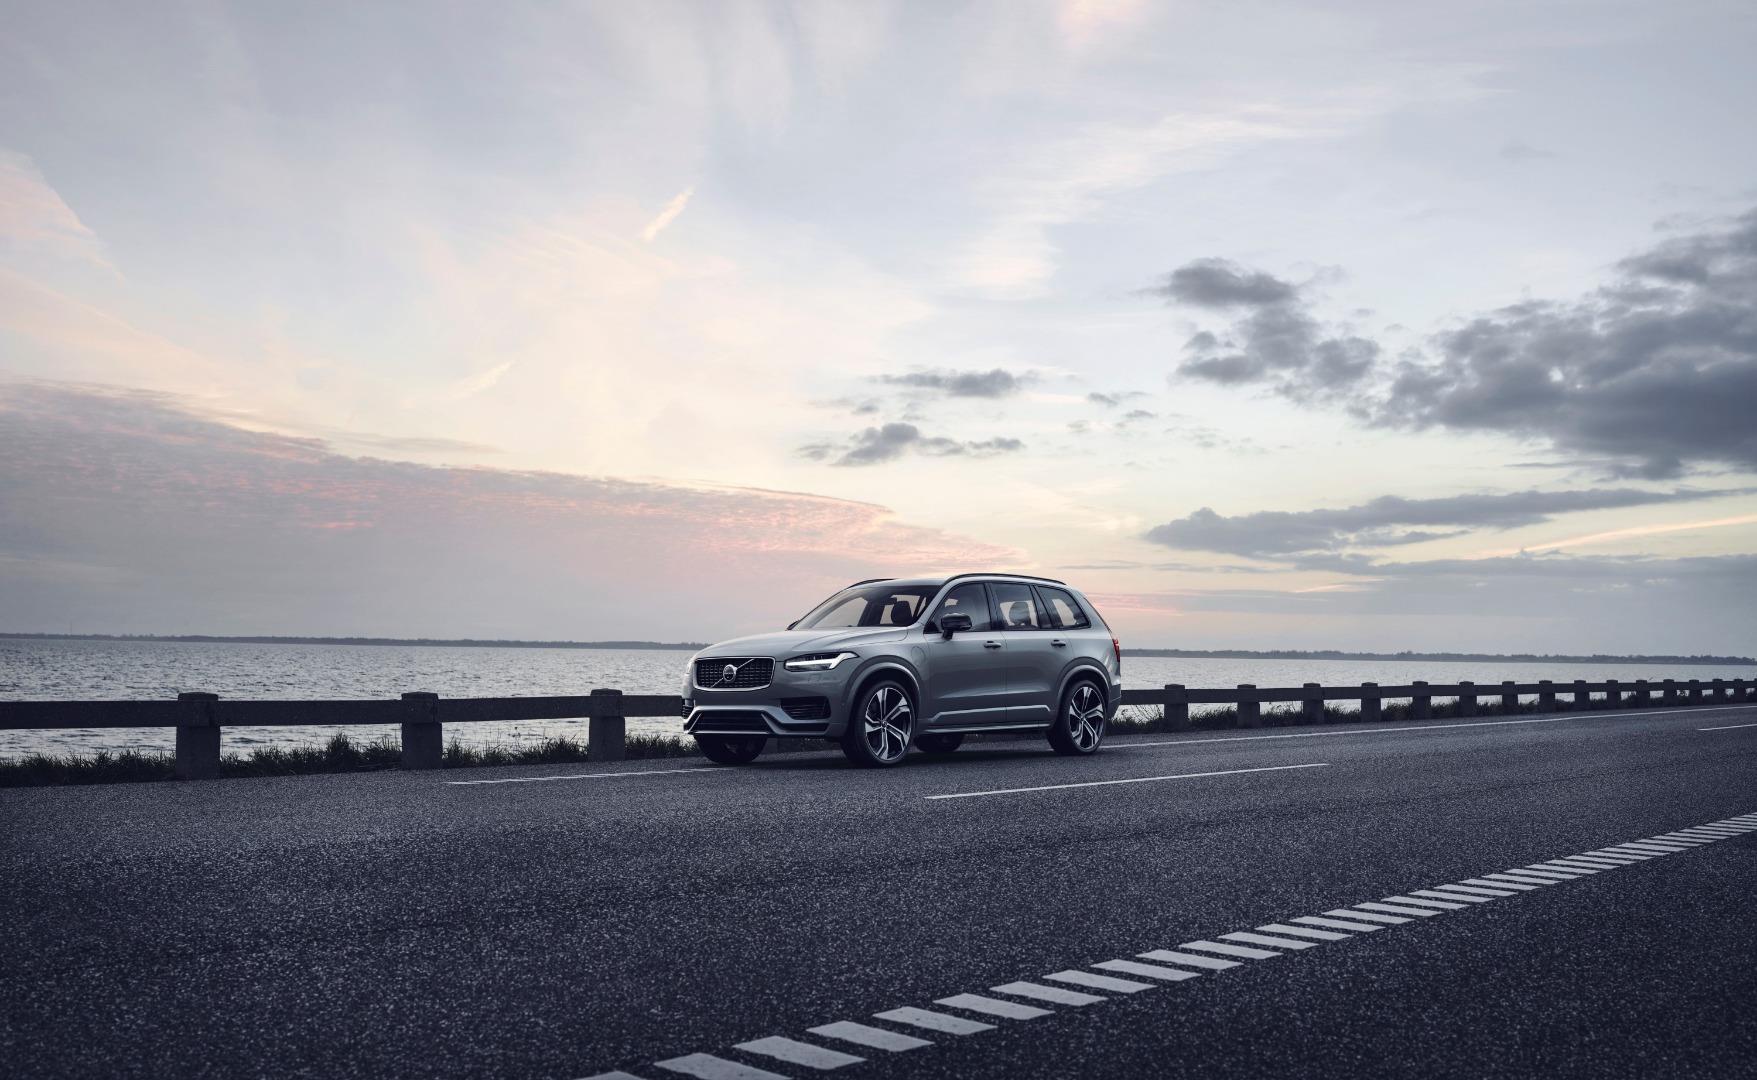 which volvo xc90 is better: diesel or petrol?